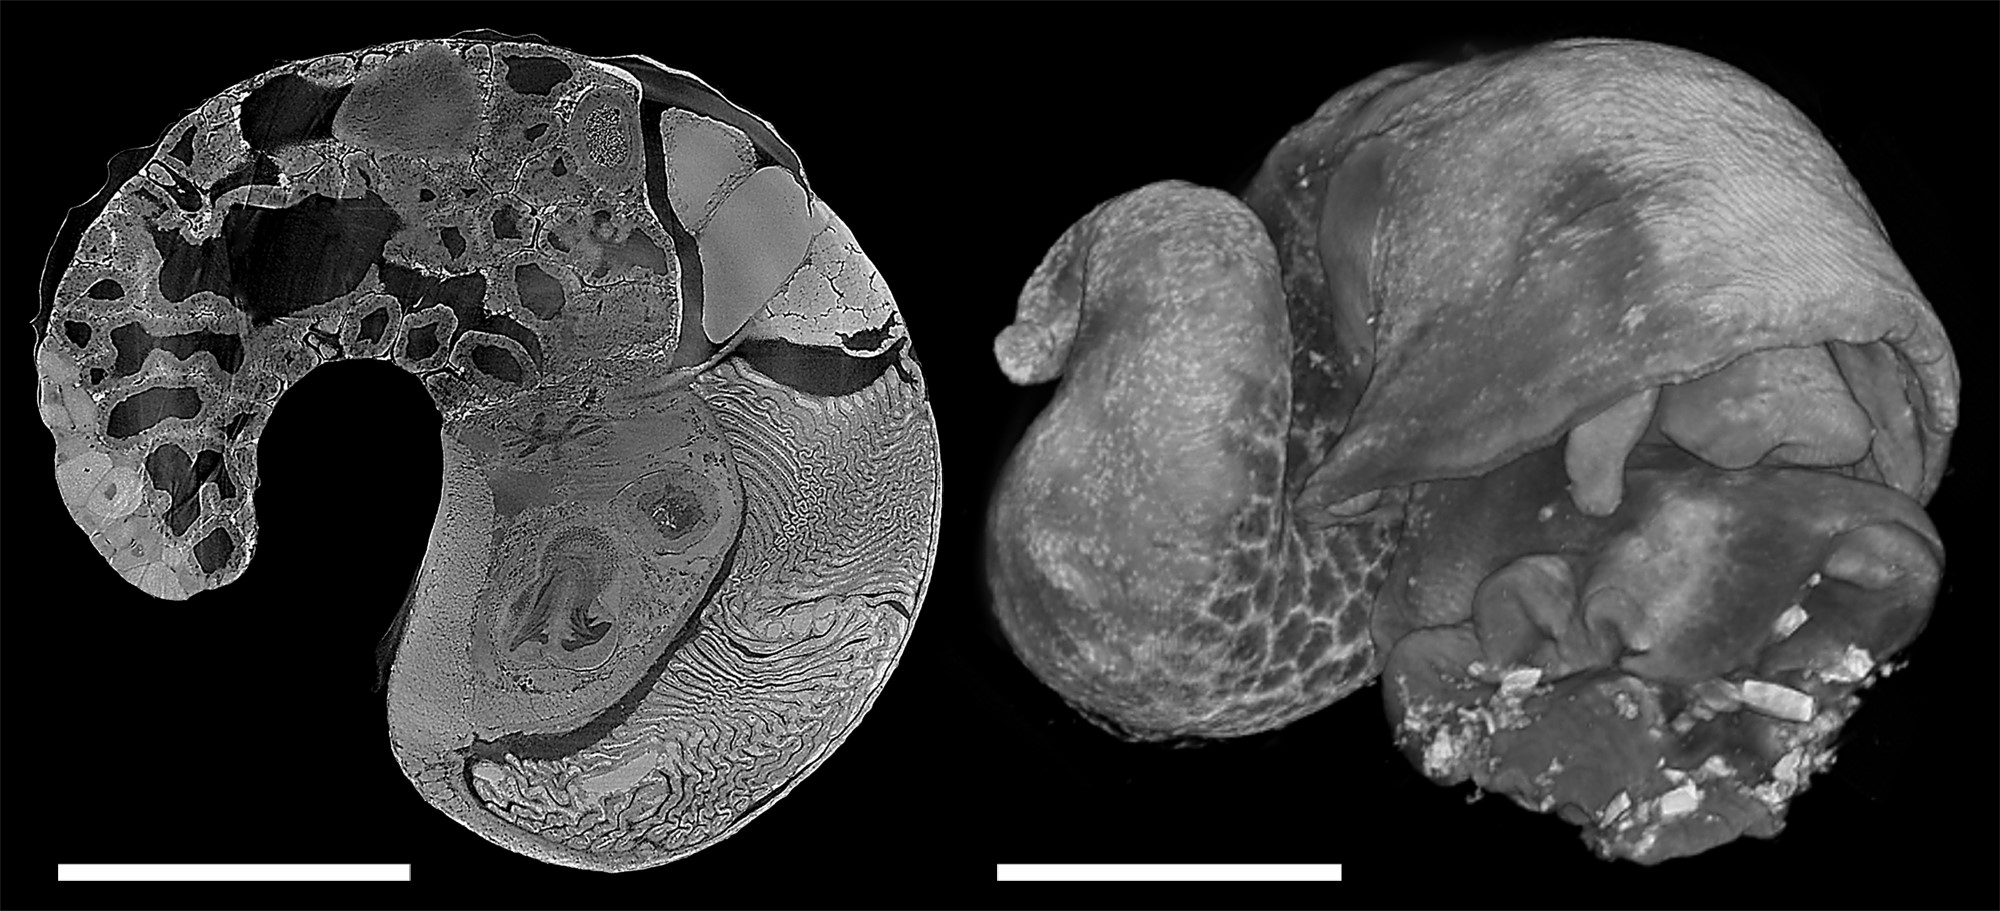 Figure 1: Results from synchrotron CT for a deep-sea neomphaline snail seen in the specialist software Amira v6.2. Left: an example slice from the image stack; right: volume rendering showing the external anatomy. Scale bars = 500 μm.